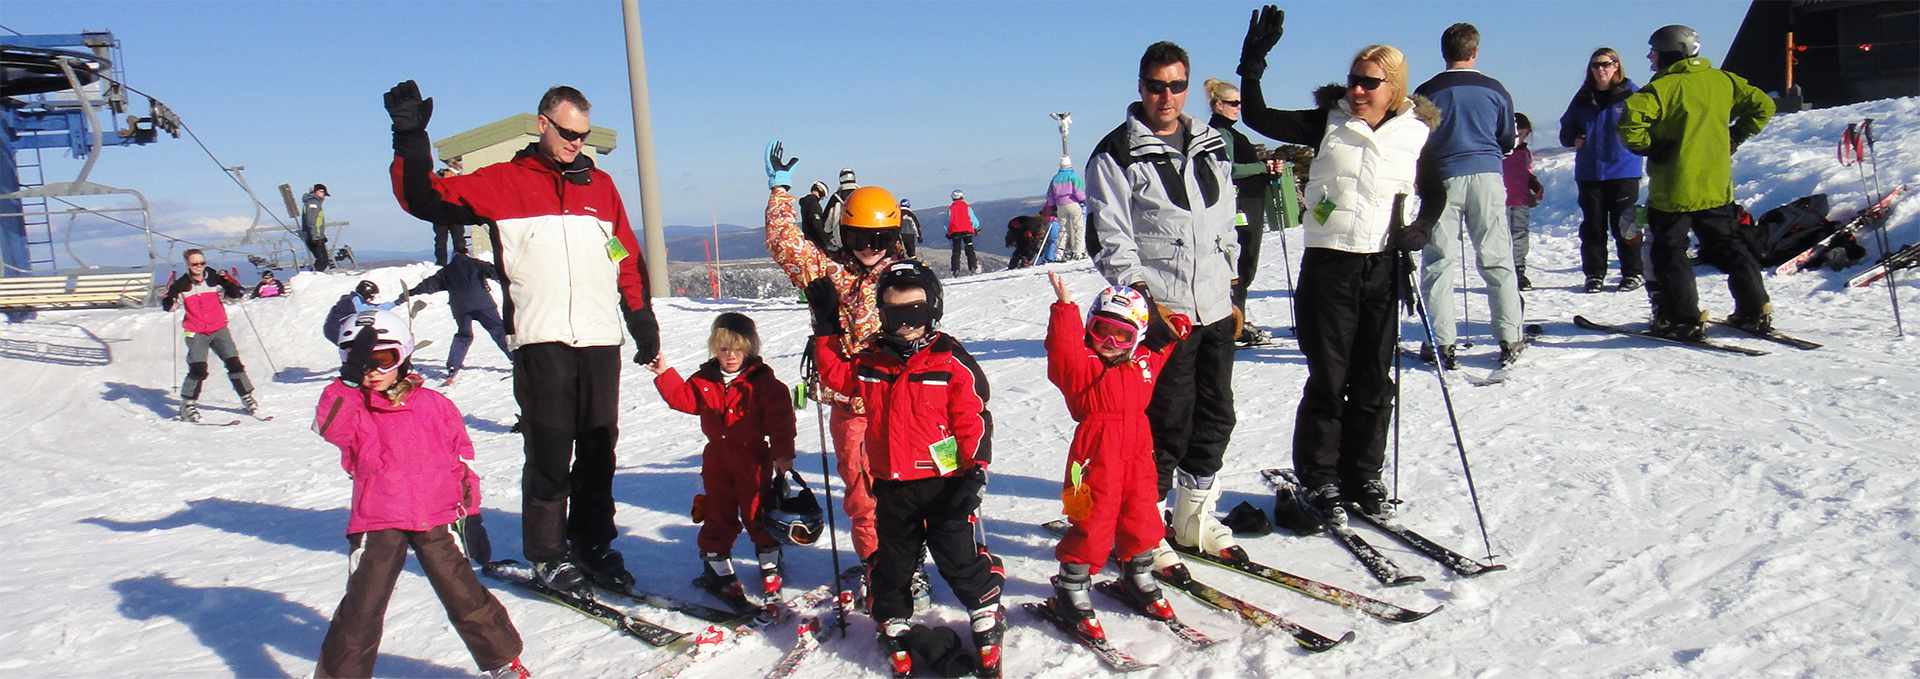 Special Family Rental Deals for Snow Skis and Snowboards